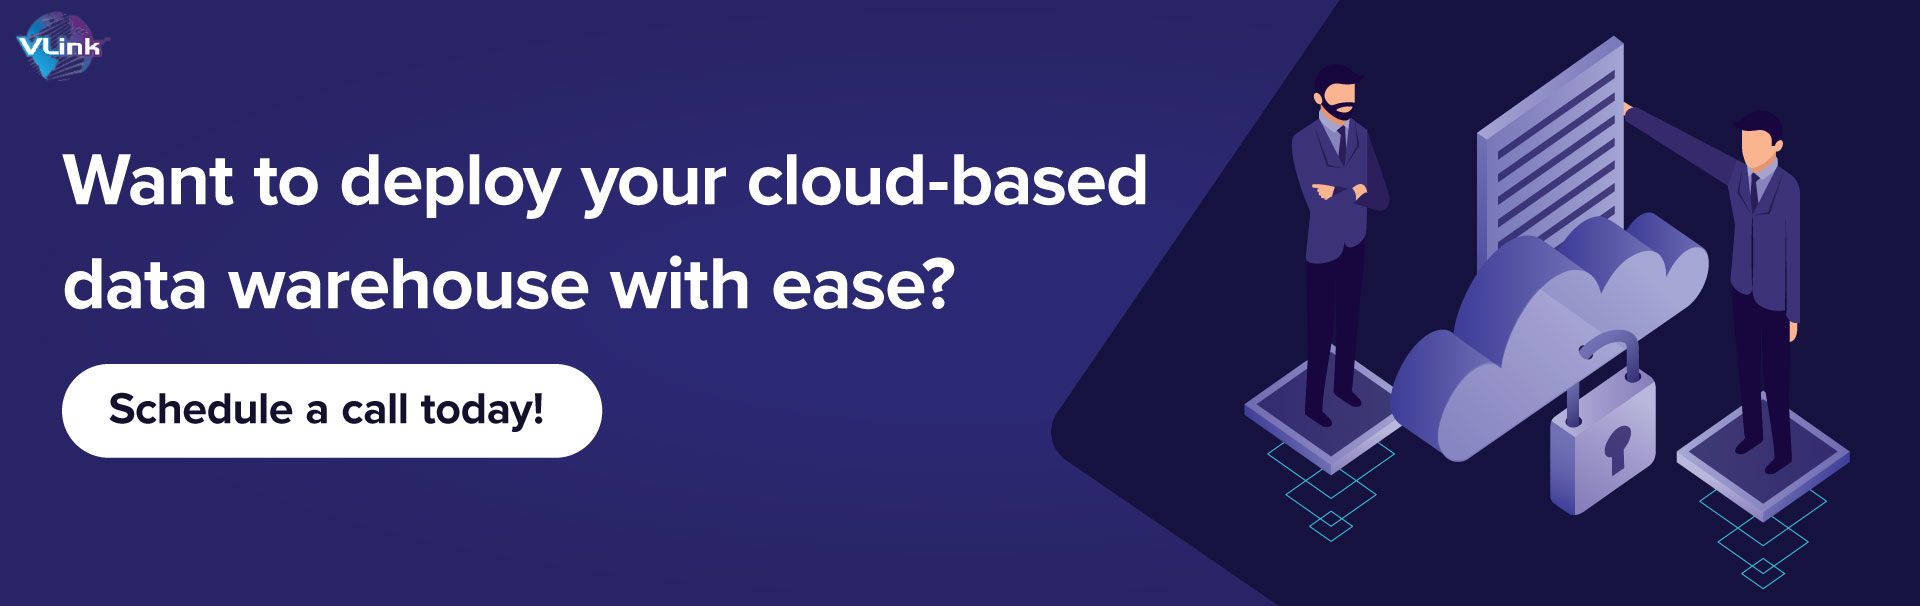 want to deploy your cloud-based data warehouse with ease